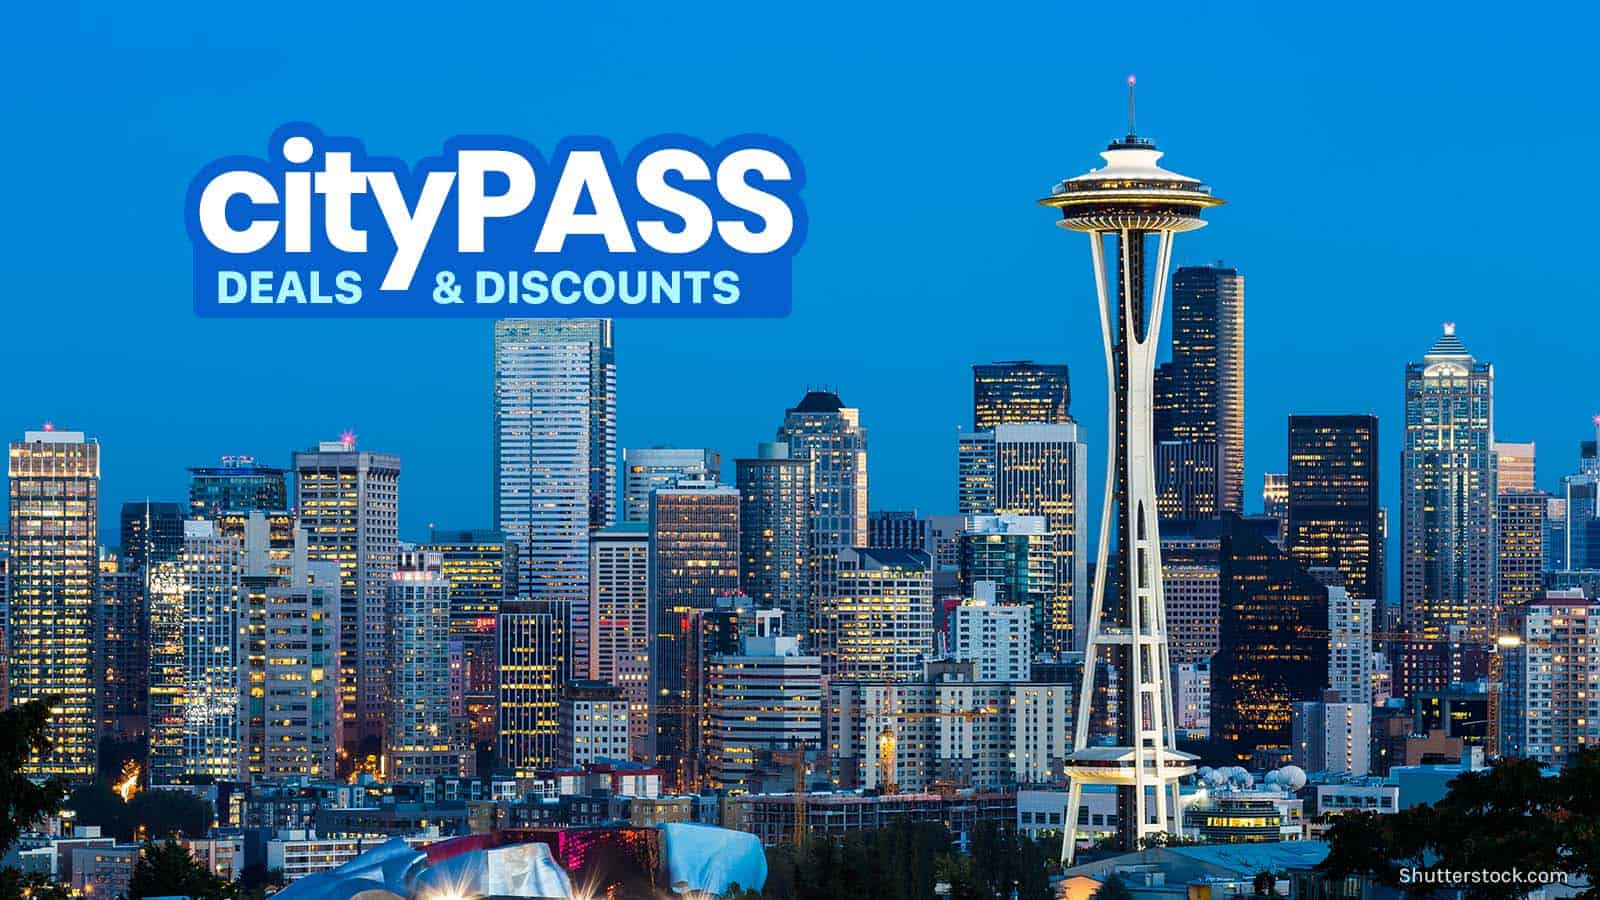 CityPASS: Discounts, Deals and Why Buy